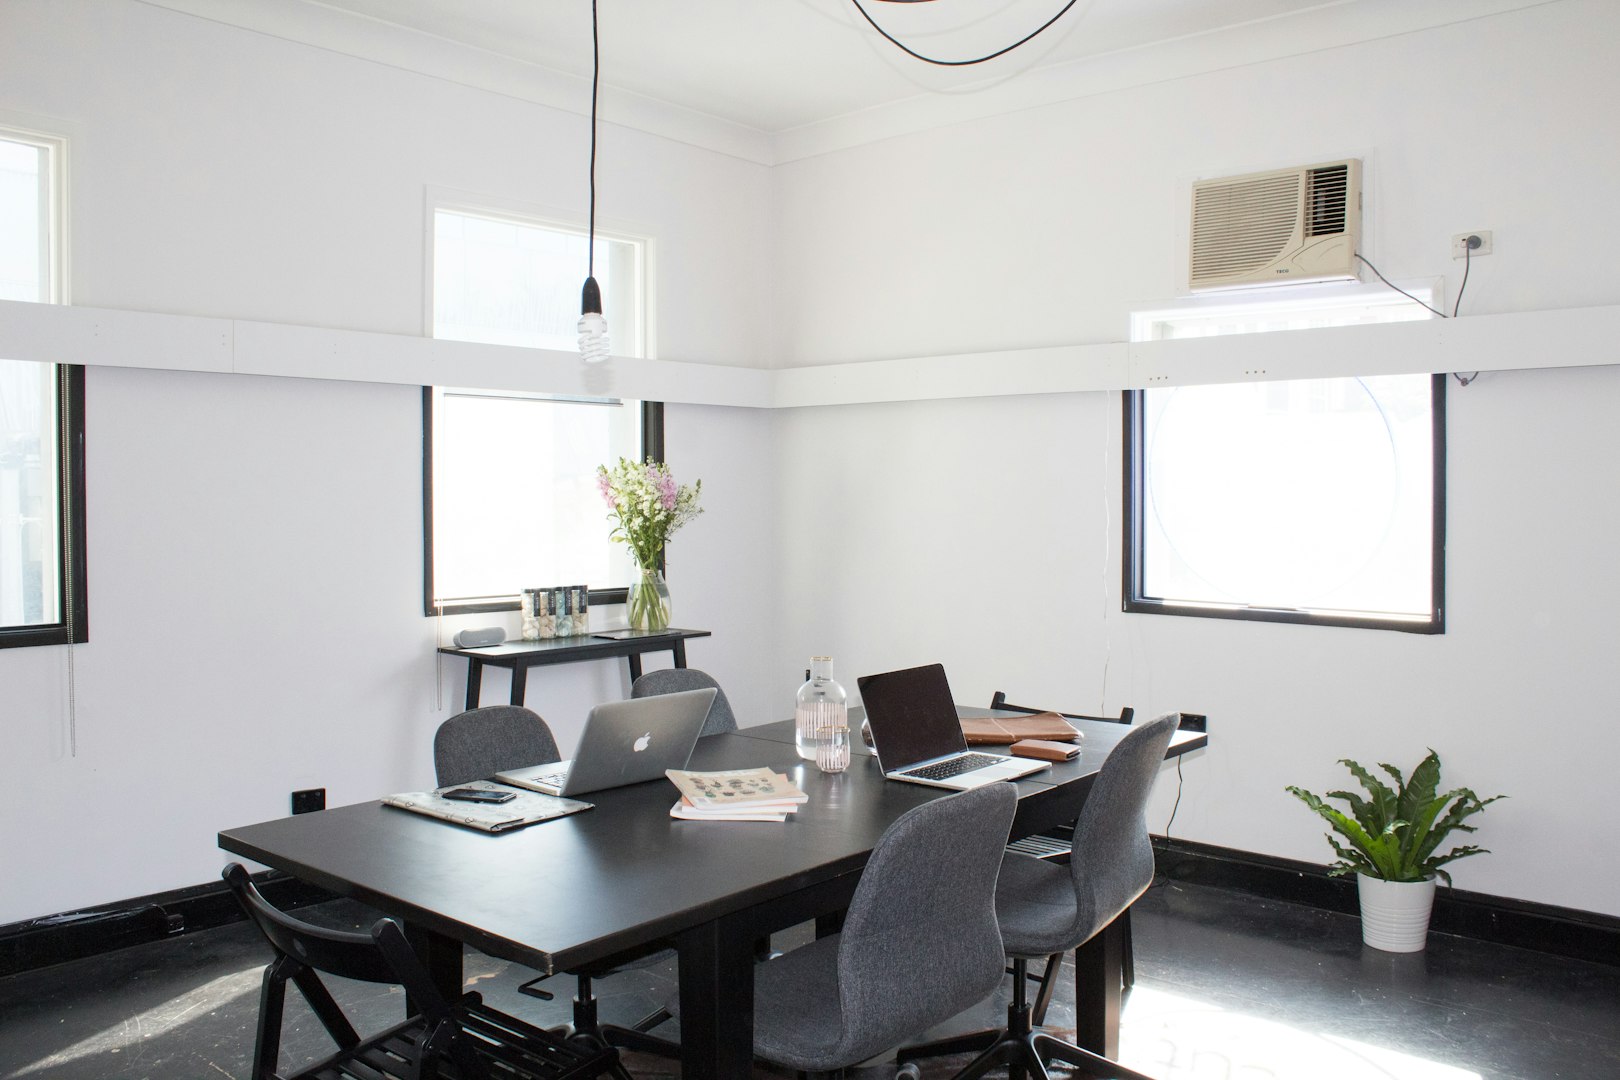 white modern office with a black desk and laptops sat on it. hanging from the ceiling there is a black lighting pendant with a large bulb. in the background there are windows and a small table with flowers on.